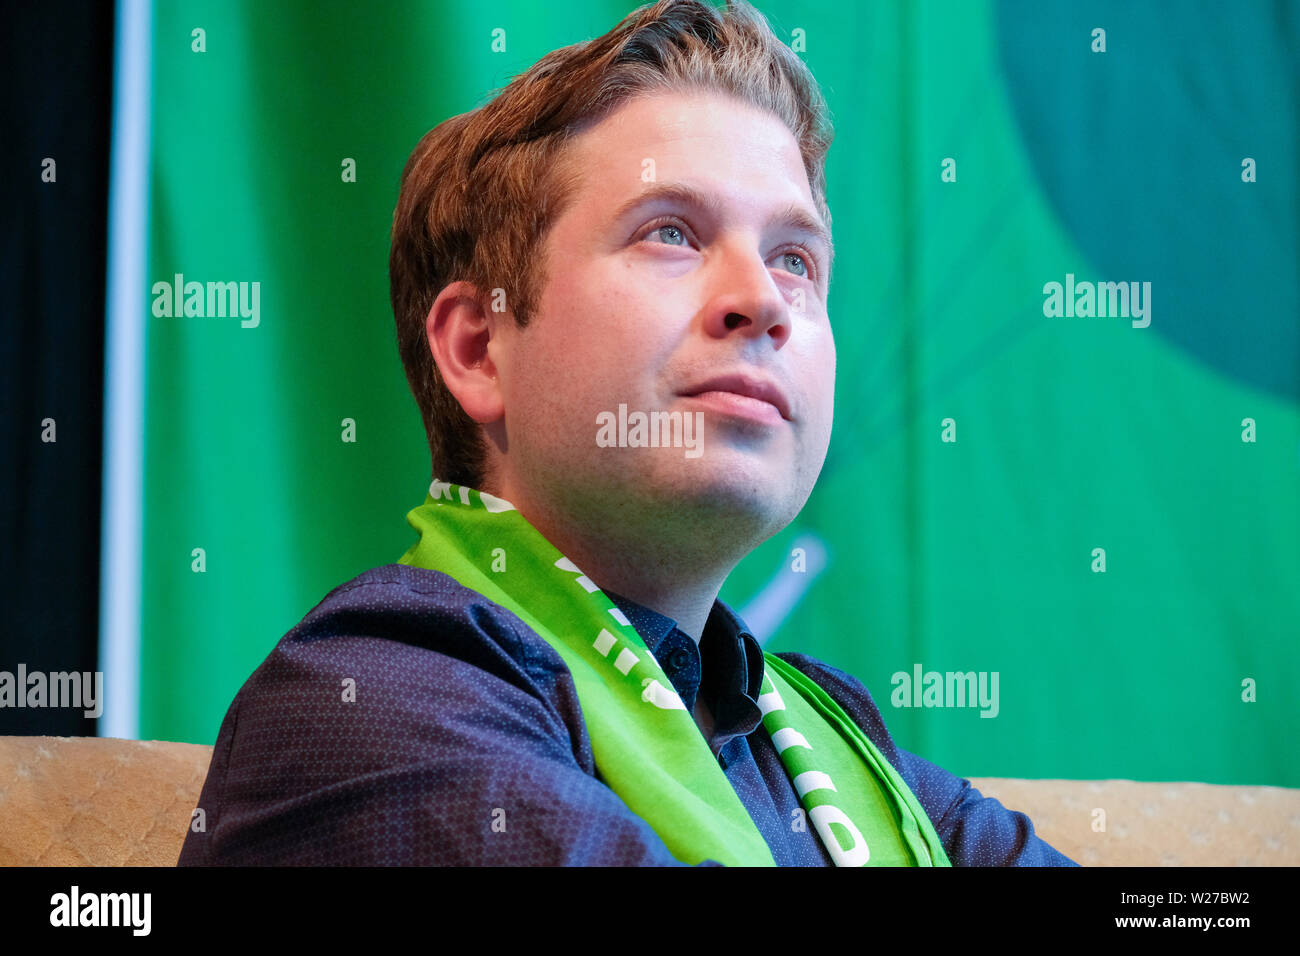 Dortmund, Germany, 21, June 2019: KEVIN KUEHNERT on a podium of the 37th German Protestant Church Congress. Kuehnert (born July 1, 1989 in West Berlin) is a German politician of the SPD Social Democratic Party.. Since 24 November 2017 he is Federal Chairman of the Young Socialists (Juso) Stock Photo